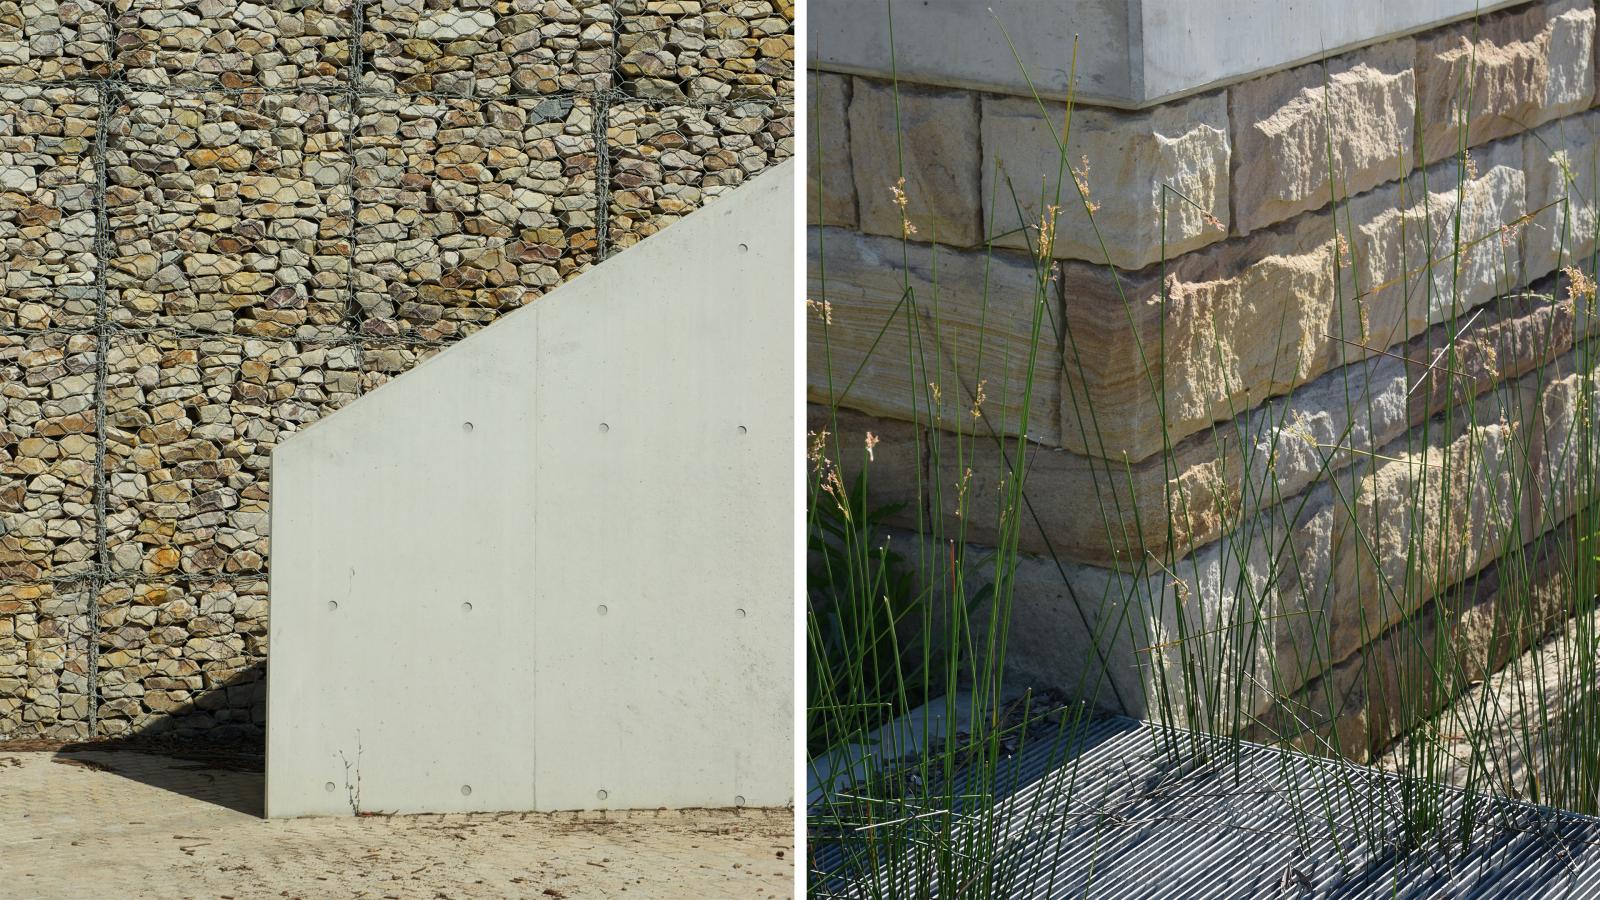 A split image shows two types of outdoor walls. The left side displays a modern gabion wall made of stones within a wire framework, alongside a sloped concrete structure in Spring Cove. The right side features a traditional stone retaining wall with grass growing near its base, reminiscent of Manly's coastal charm.